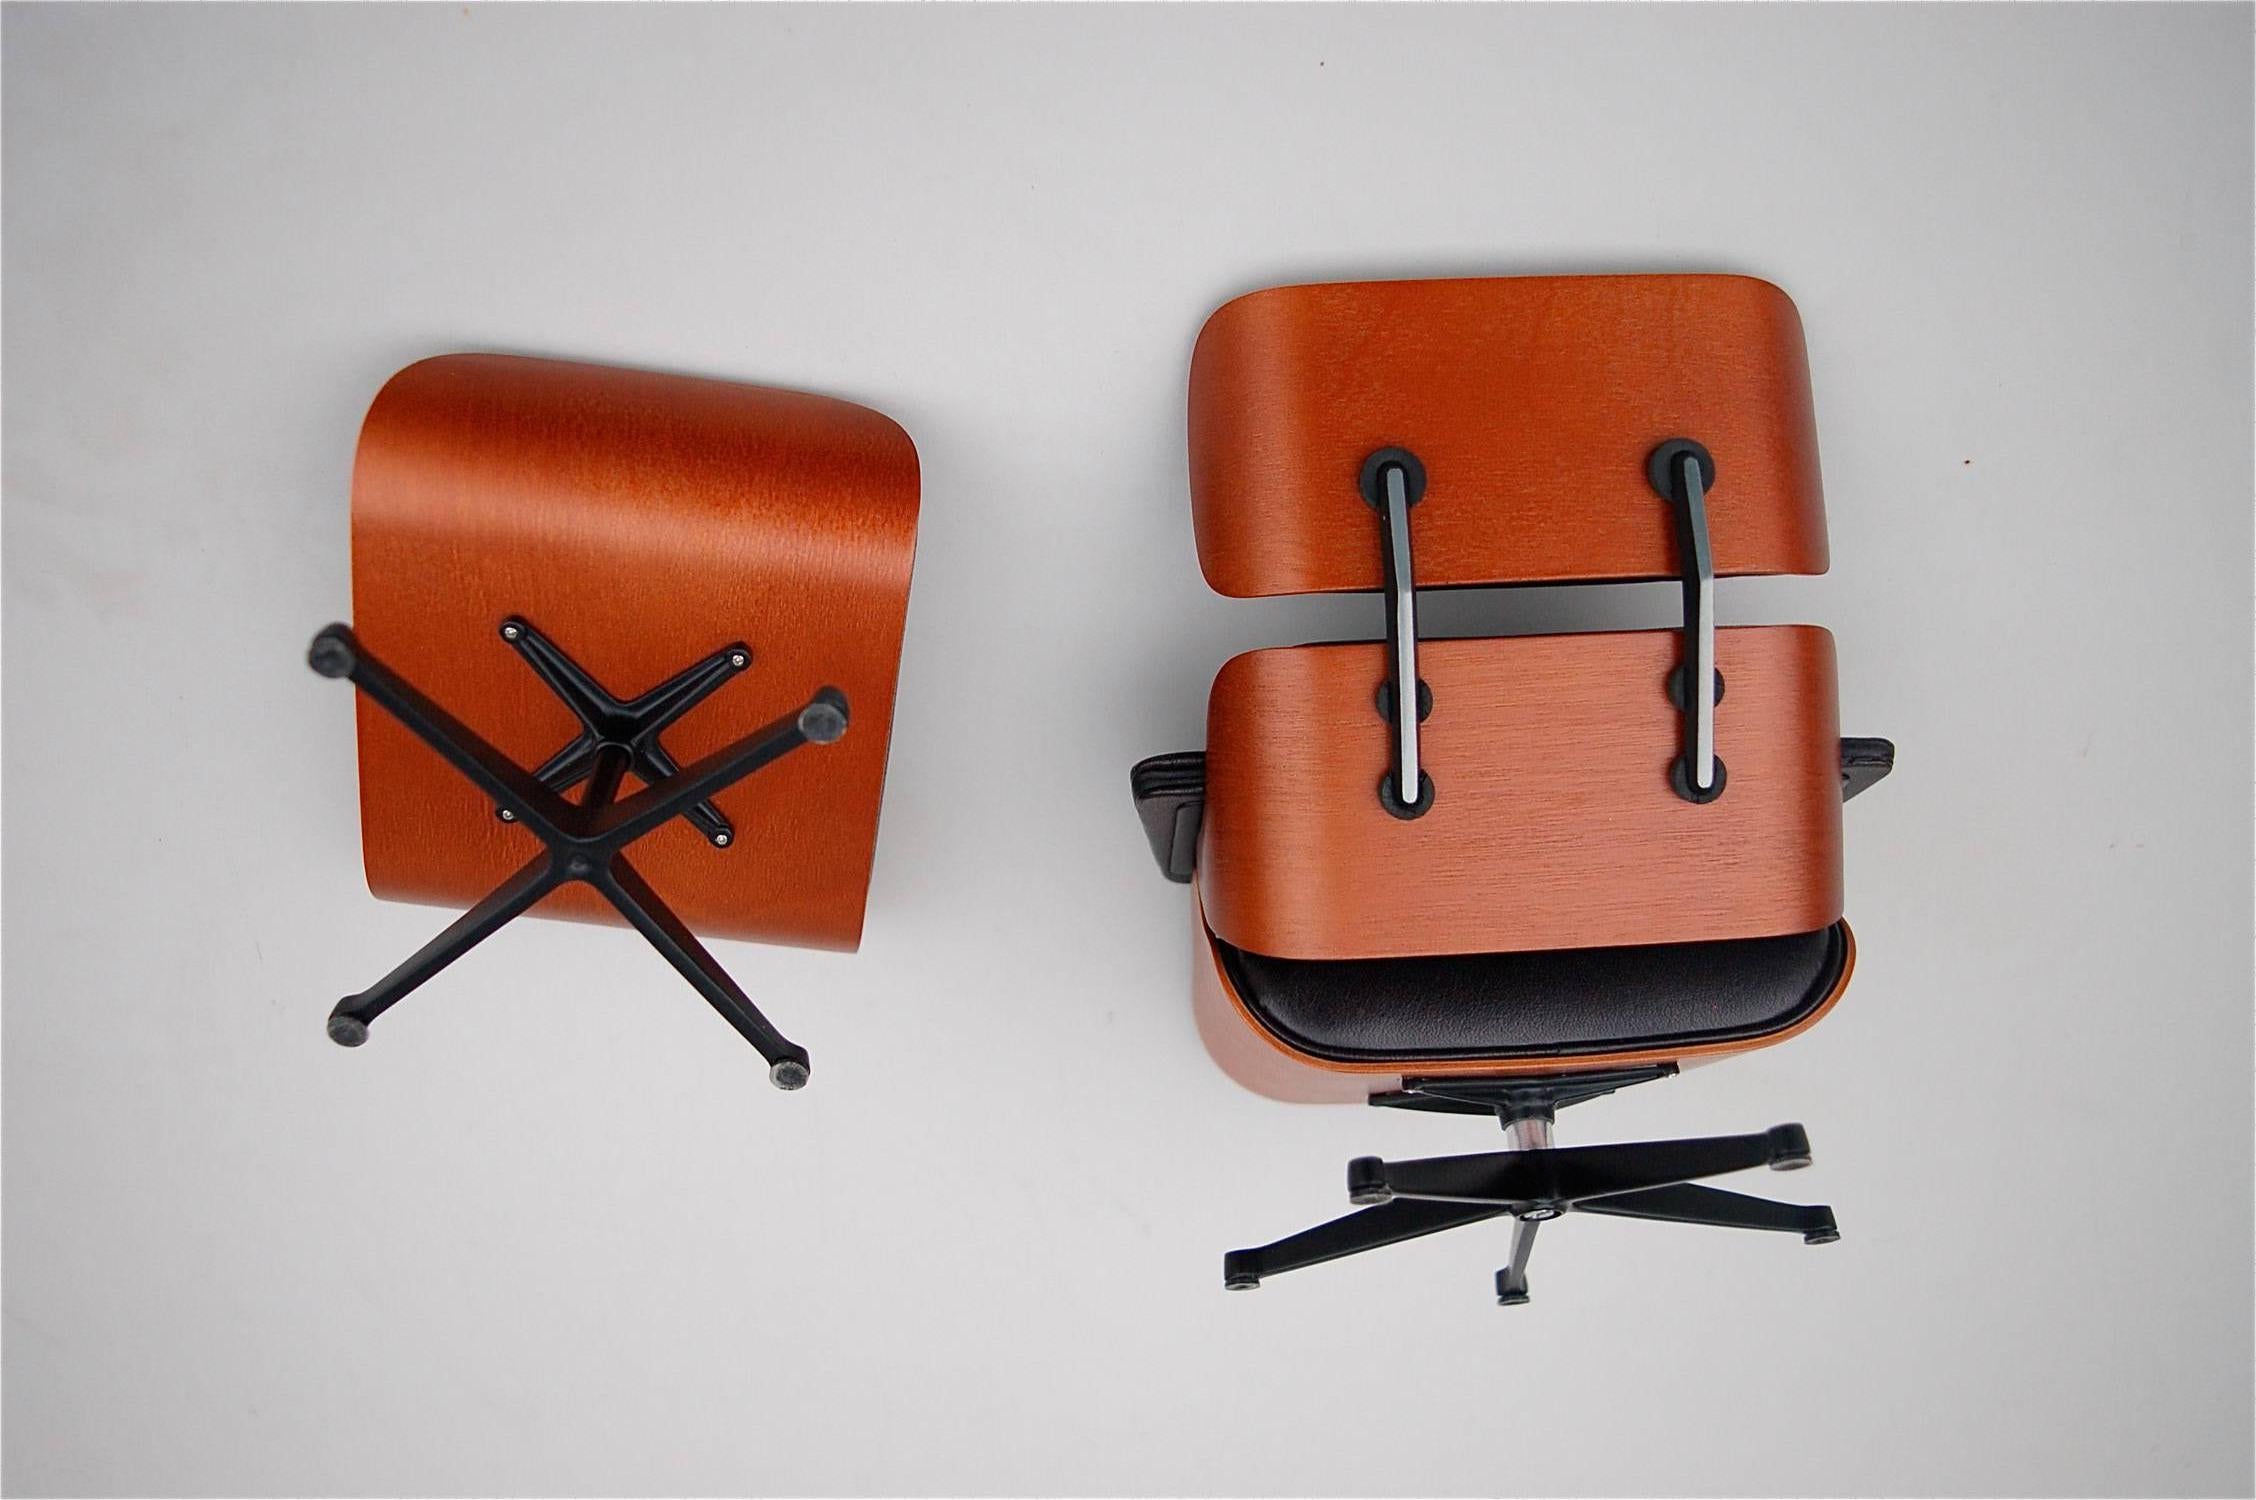 20th Century Vitra Miniature Eames Lounge Chair and Ottoman in as New Condition